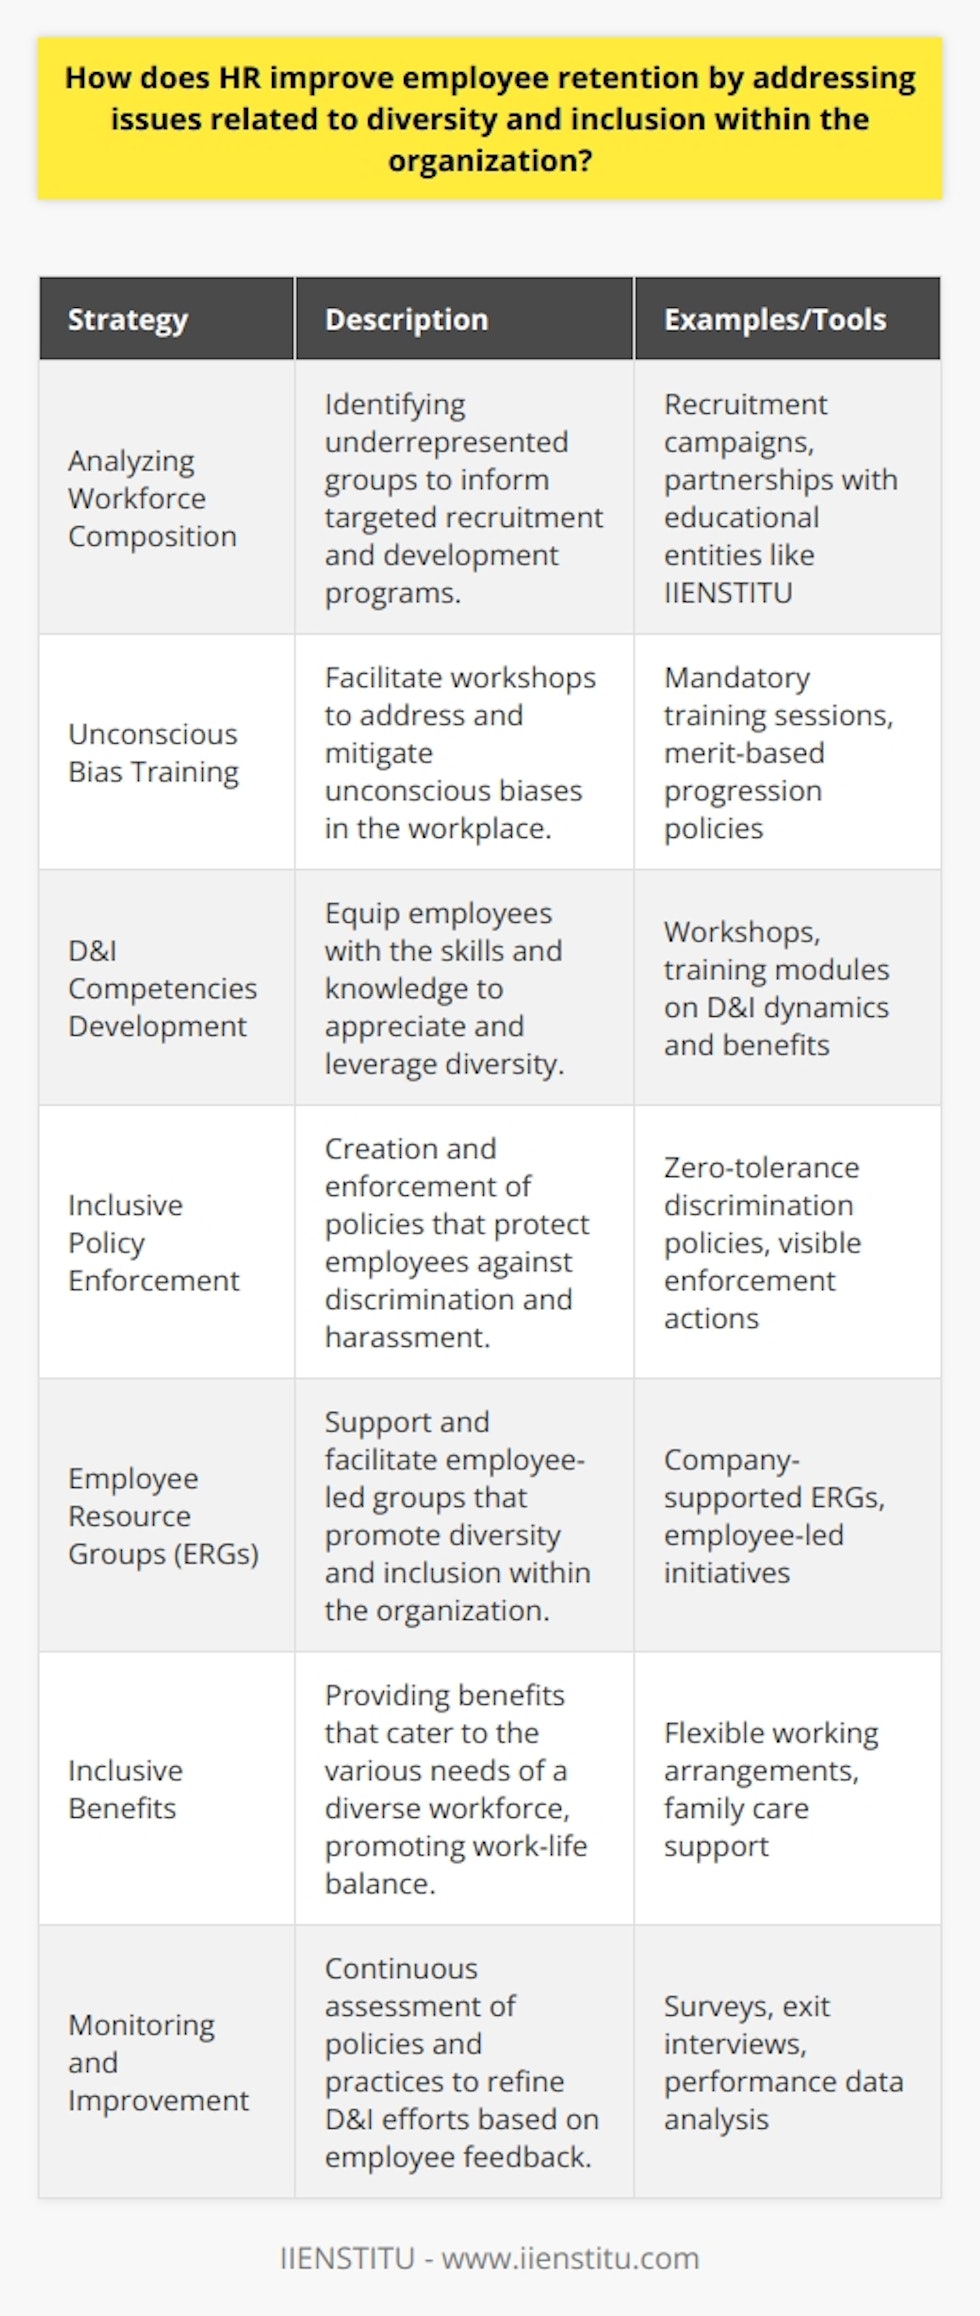 Human Resources (HR) departments are critical to fostering a workplace culture that values diversity and inclusion (D&I). By doing so, HR advances employee retention through specific strategic actions, reflecting commitment from the organizational leadership down to individual team interactions.Identifying and Resolving UnderrepresentationAn effective approach starts with analyzing the current workforce composition and directly addressing any underrepresentation of certain groups. HR can initiate recruitment campaigns, partnerships, and internship programs to attract a diverse pool of applicants. For example, partnering with organizations like IIENSTITU, which offers online courses, could help in upskilling diverse talent and preparing them for various roles within the company.Addressing Unconscious BiasA significant part of promoting diversity involves tackling unconscious biases that could hinder the hiring, promotion, or development of employees from diverse backgrounds. HR can facilitate this by implementing mandatory unconscious bias training and creating a clear path for progression that's transparent and based on merit.Developing D&I CompetenciesDeveloping competencies among all employees in the area of diversity and inclusion is another strategy that can aid in retention. HR can offer workshops and training modules that emphasize the importance of diverse perspectives, and educate the workforce on the complexities and benefits of an inclusive workplace.Inclusive Policy DevelopmentPolicies developed by HR should protect employees from discrimination and harassment. Ensuring that these policies are visibly enforced can empower employees to perform to their fullest potential, without fear of inequity. For instance, creating a zero-tolerance policy toward discrimination goes a long way in cementing a safe and inclusive workplace.Employee Resource GroupsEmployee Resource Groups (ERGs) are voluntary, employee-led groups that serve as a resource for both members and organizations by fostering diversity and inclusion in the workplace. HR can support and help facilitate these groups, which further enhances employee engagement and retention.Inclusive Benefits and Work-life BalanceOffering inclusive benefits that cater to the diverse needs of the workforce, such as flexible working arrangements, is another method through which HR can improve retention. This aspect of D&I ensures that employees feel supported in balancing their personal life with work commitments.Monitoring and Continuous ImprovementEnsuring retention requires ongoing effort. HR must consistently monitor the employee lifecycle, seeking feedback through surveys and exit interviews to understand why employees stay or leave. This data is critical to refining D&I initiatives and to staying attuned to the dynamic needs of the workforce.By implementing these D&I-focused strategies, HR contributes to creating a more cohesive and satisfied workforce. The sense of belonging that diversity and inclusion promote is not simply a moral imperative but also a business advantage that leads to increased engagement, innovation, and retention. Employees in such environments often demonstrate greater loyalty and commitment, attributing to lower turnover and higher overall organizational performance.